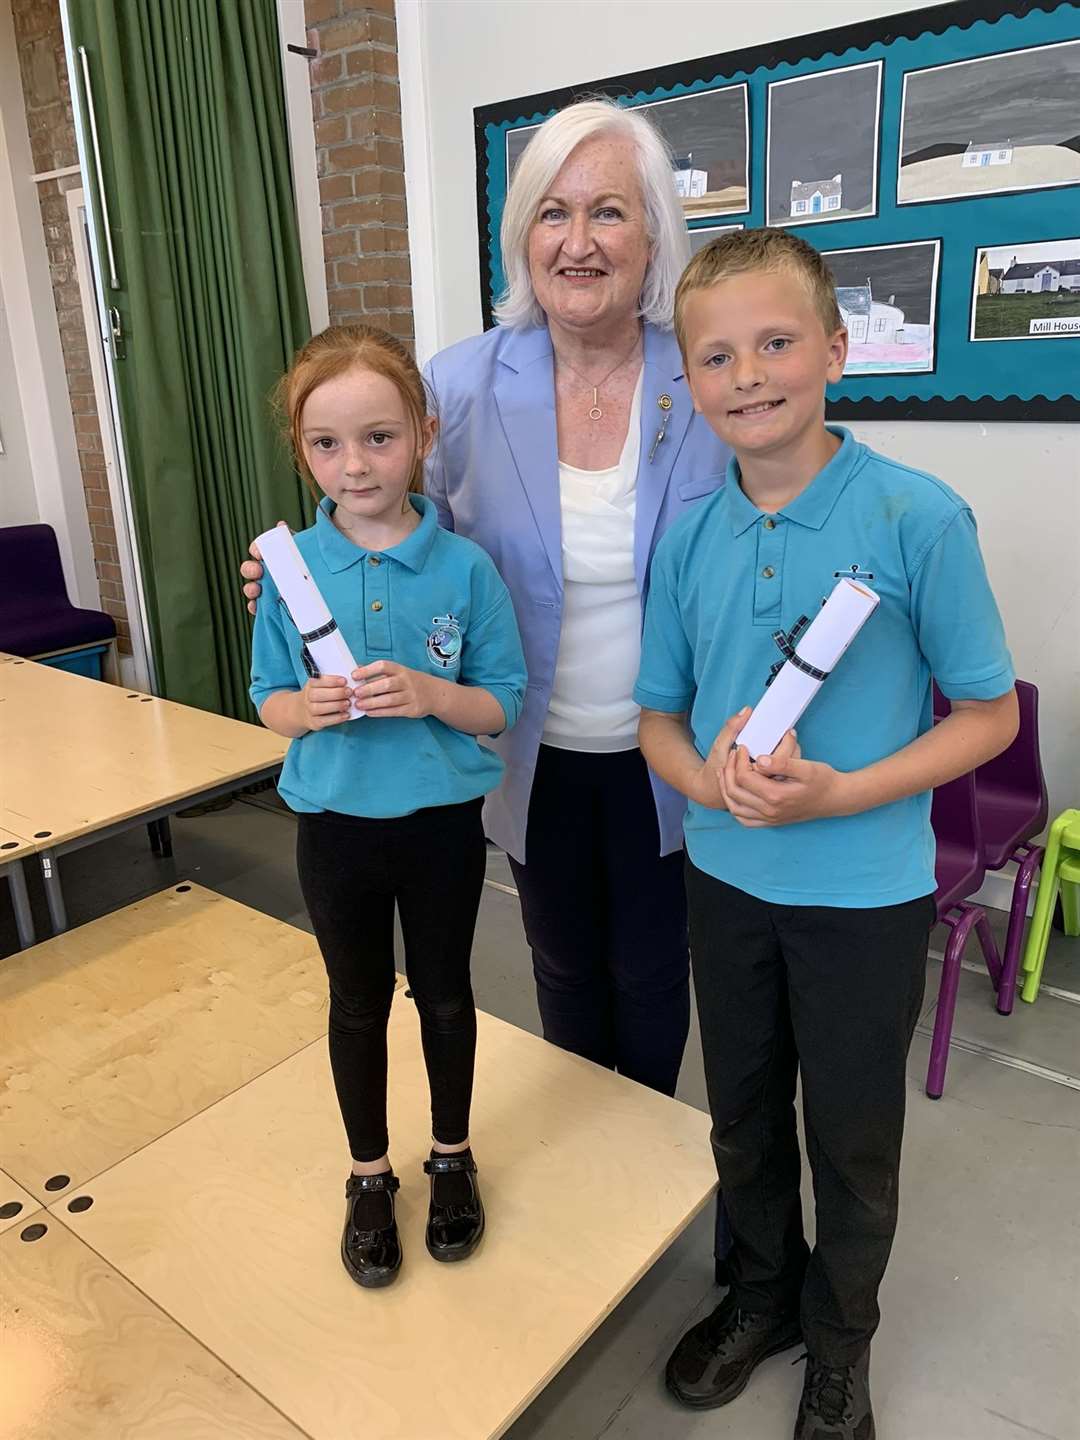 Deputy Lieutenant Frances Gunn visited Melvich Primary School to present the Coronation Art Competition certificates to pupils. Ella Will won the p1-3 category and Benjamin Mackinnon the p4-7 class.